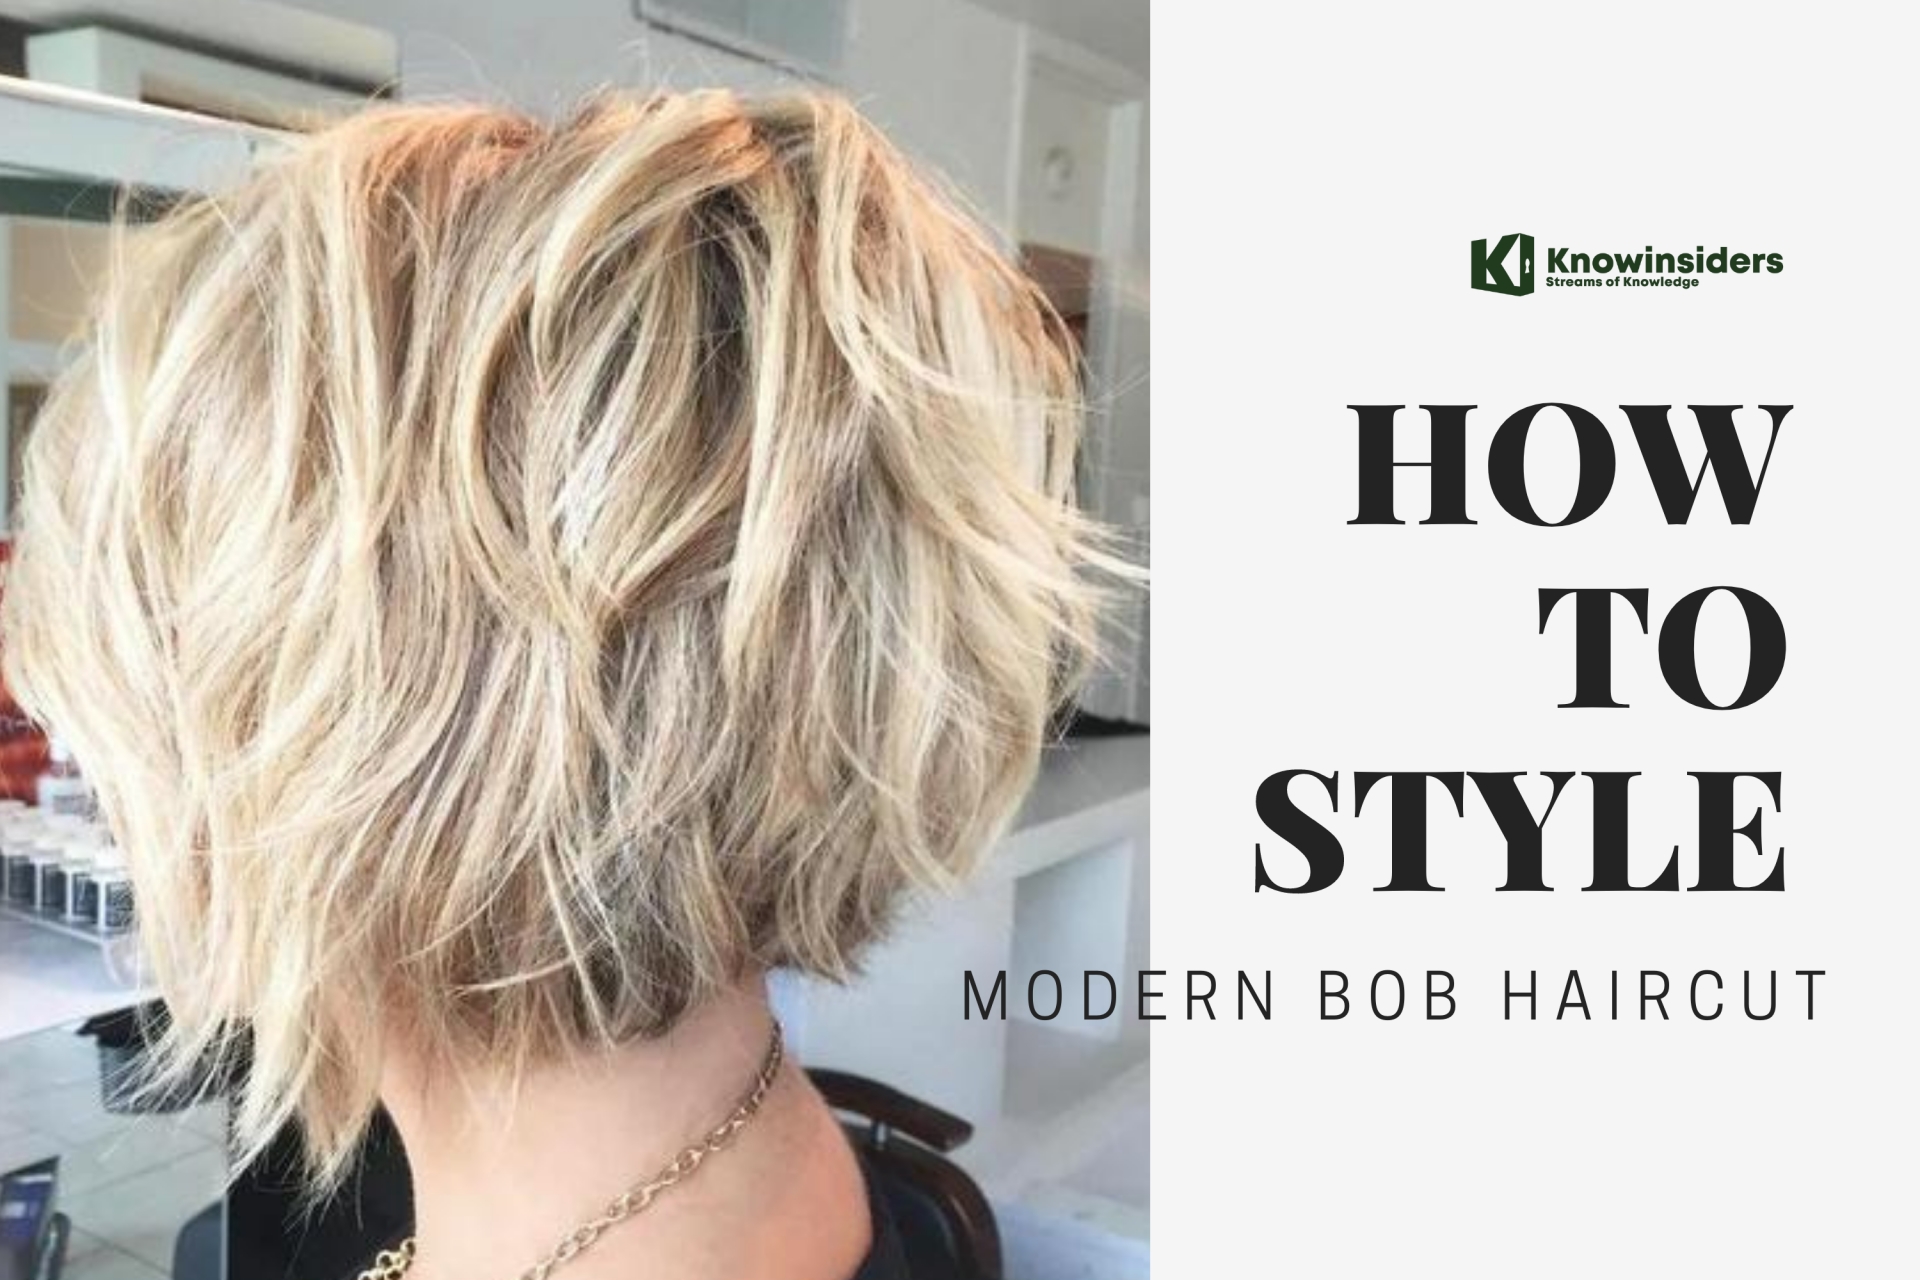 How To Style & Take Care Of Bob Haircut In New Ways